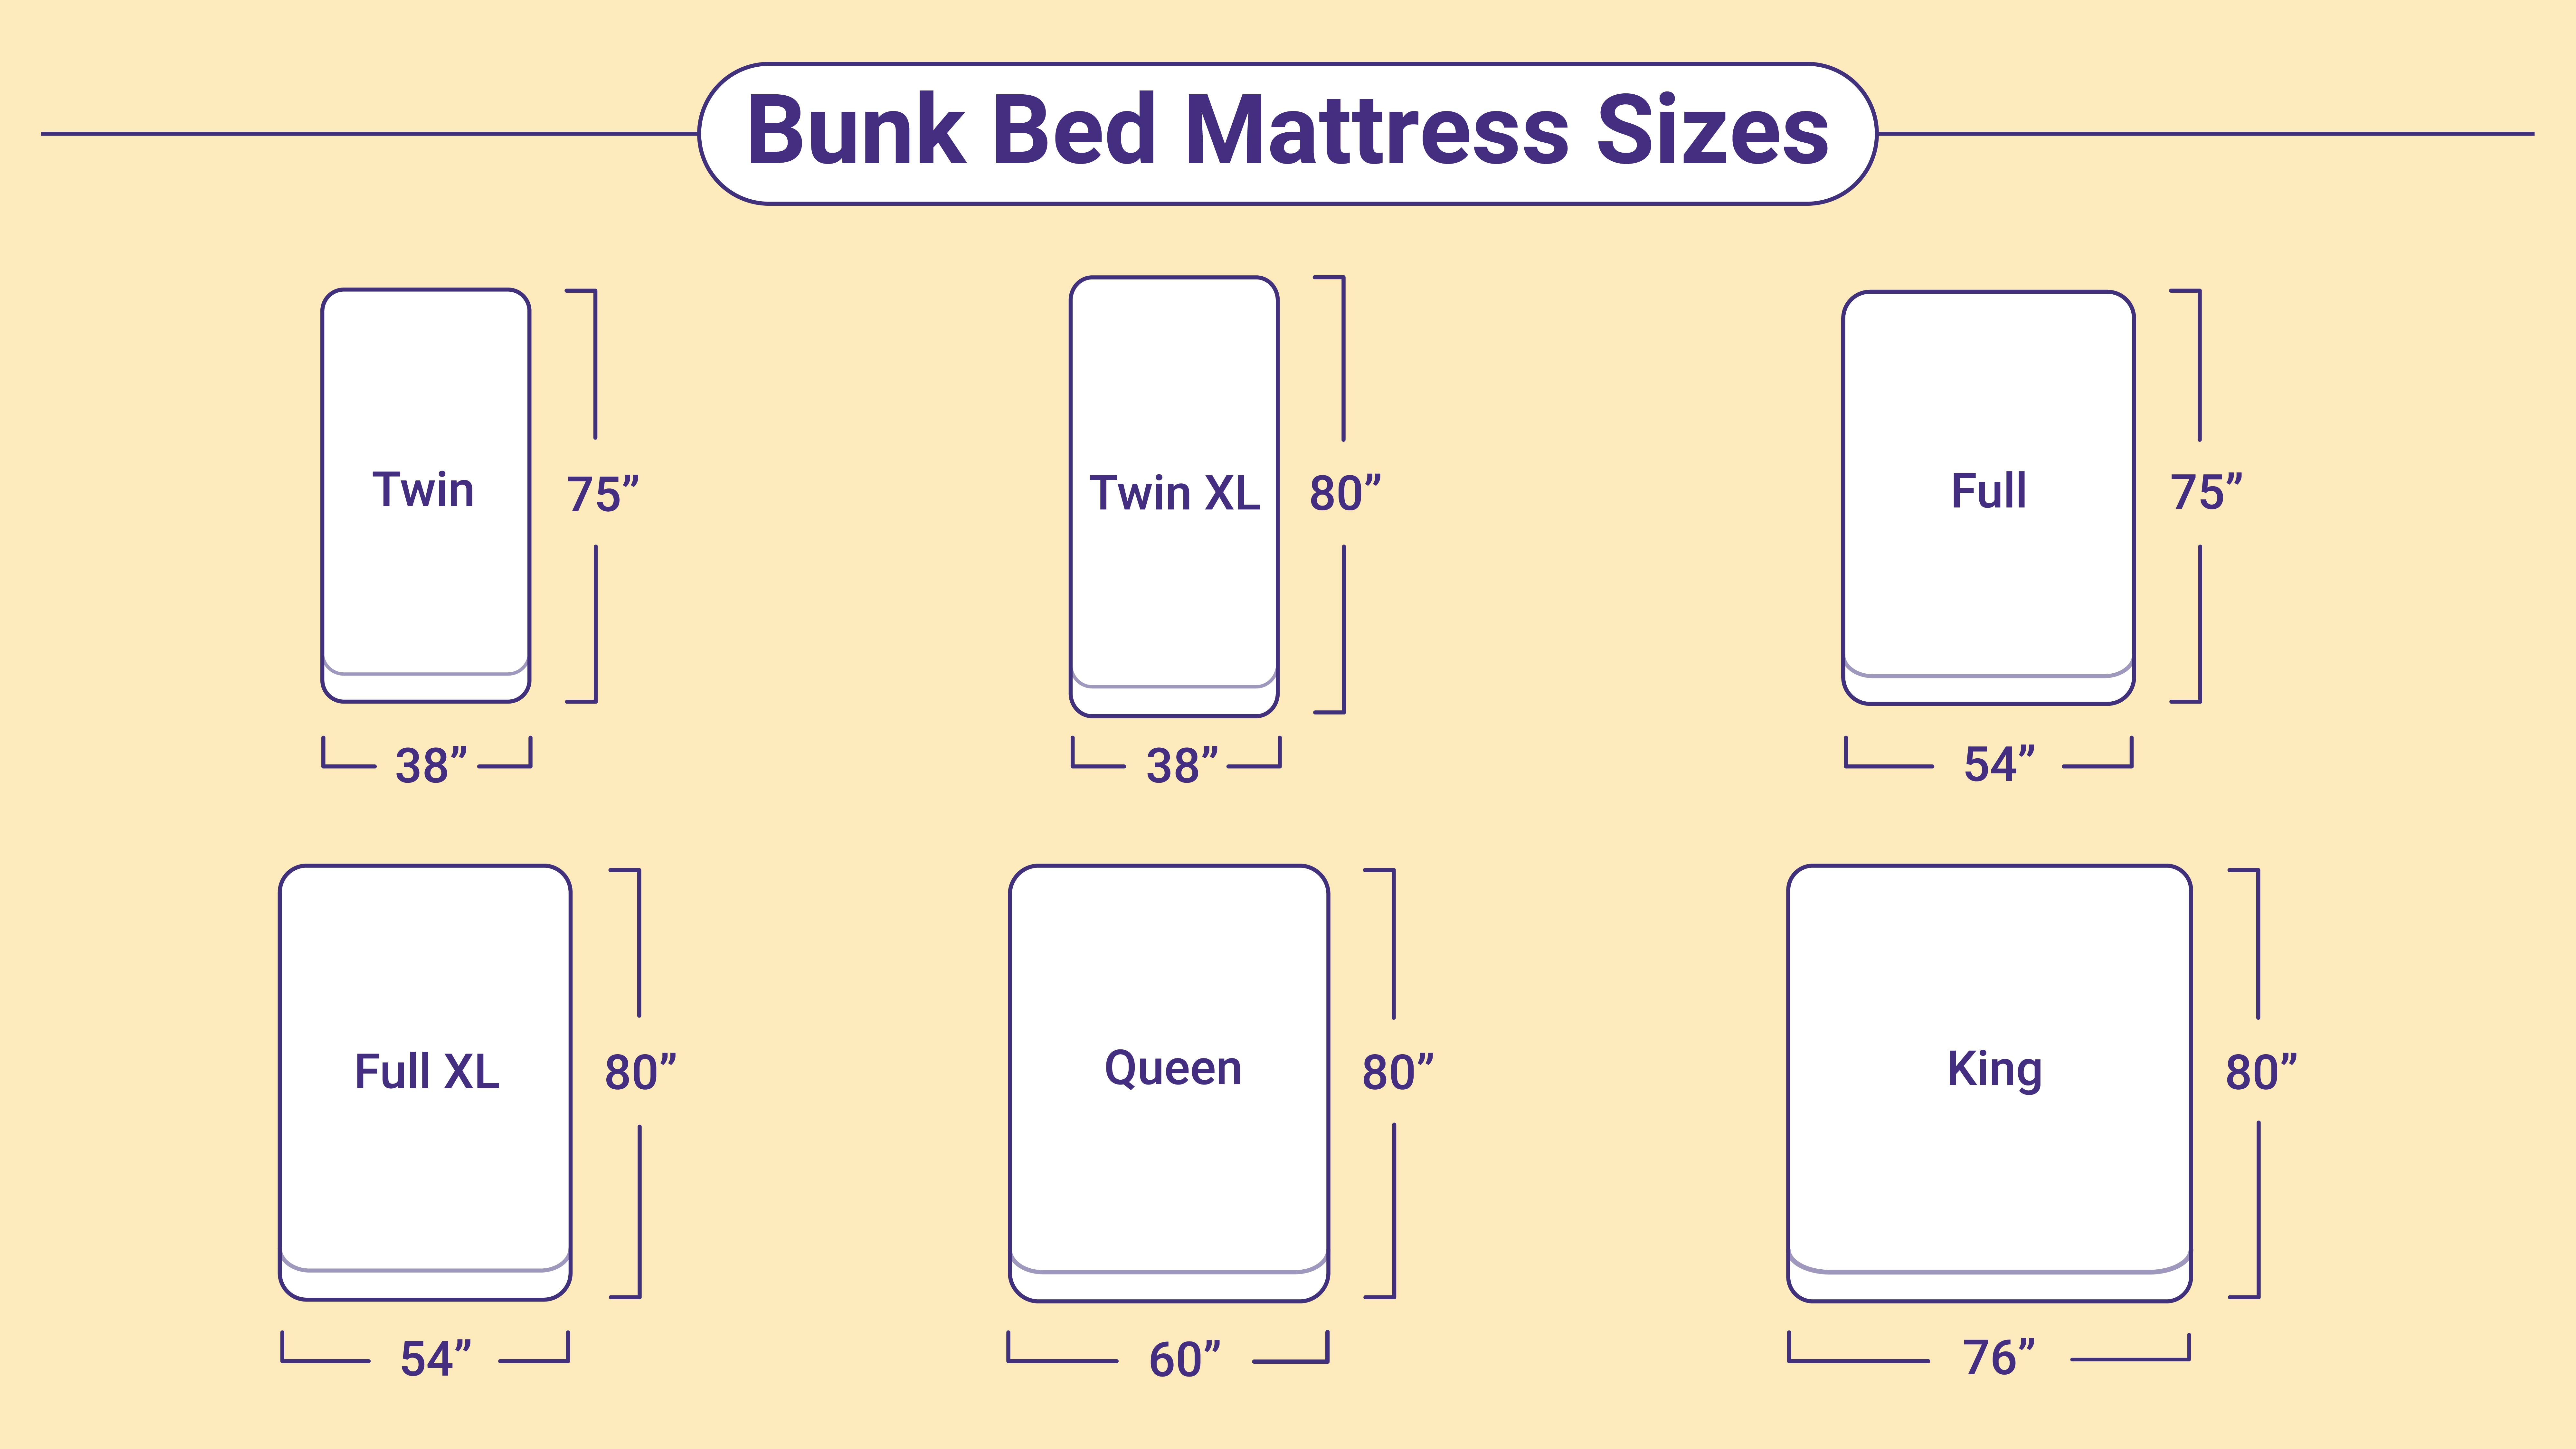 Bunk Bed Mattress Sizes And Dimensions, Twin Bed Mattress Width